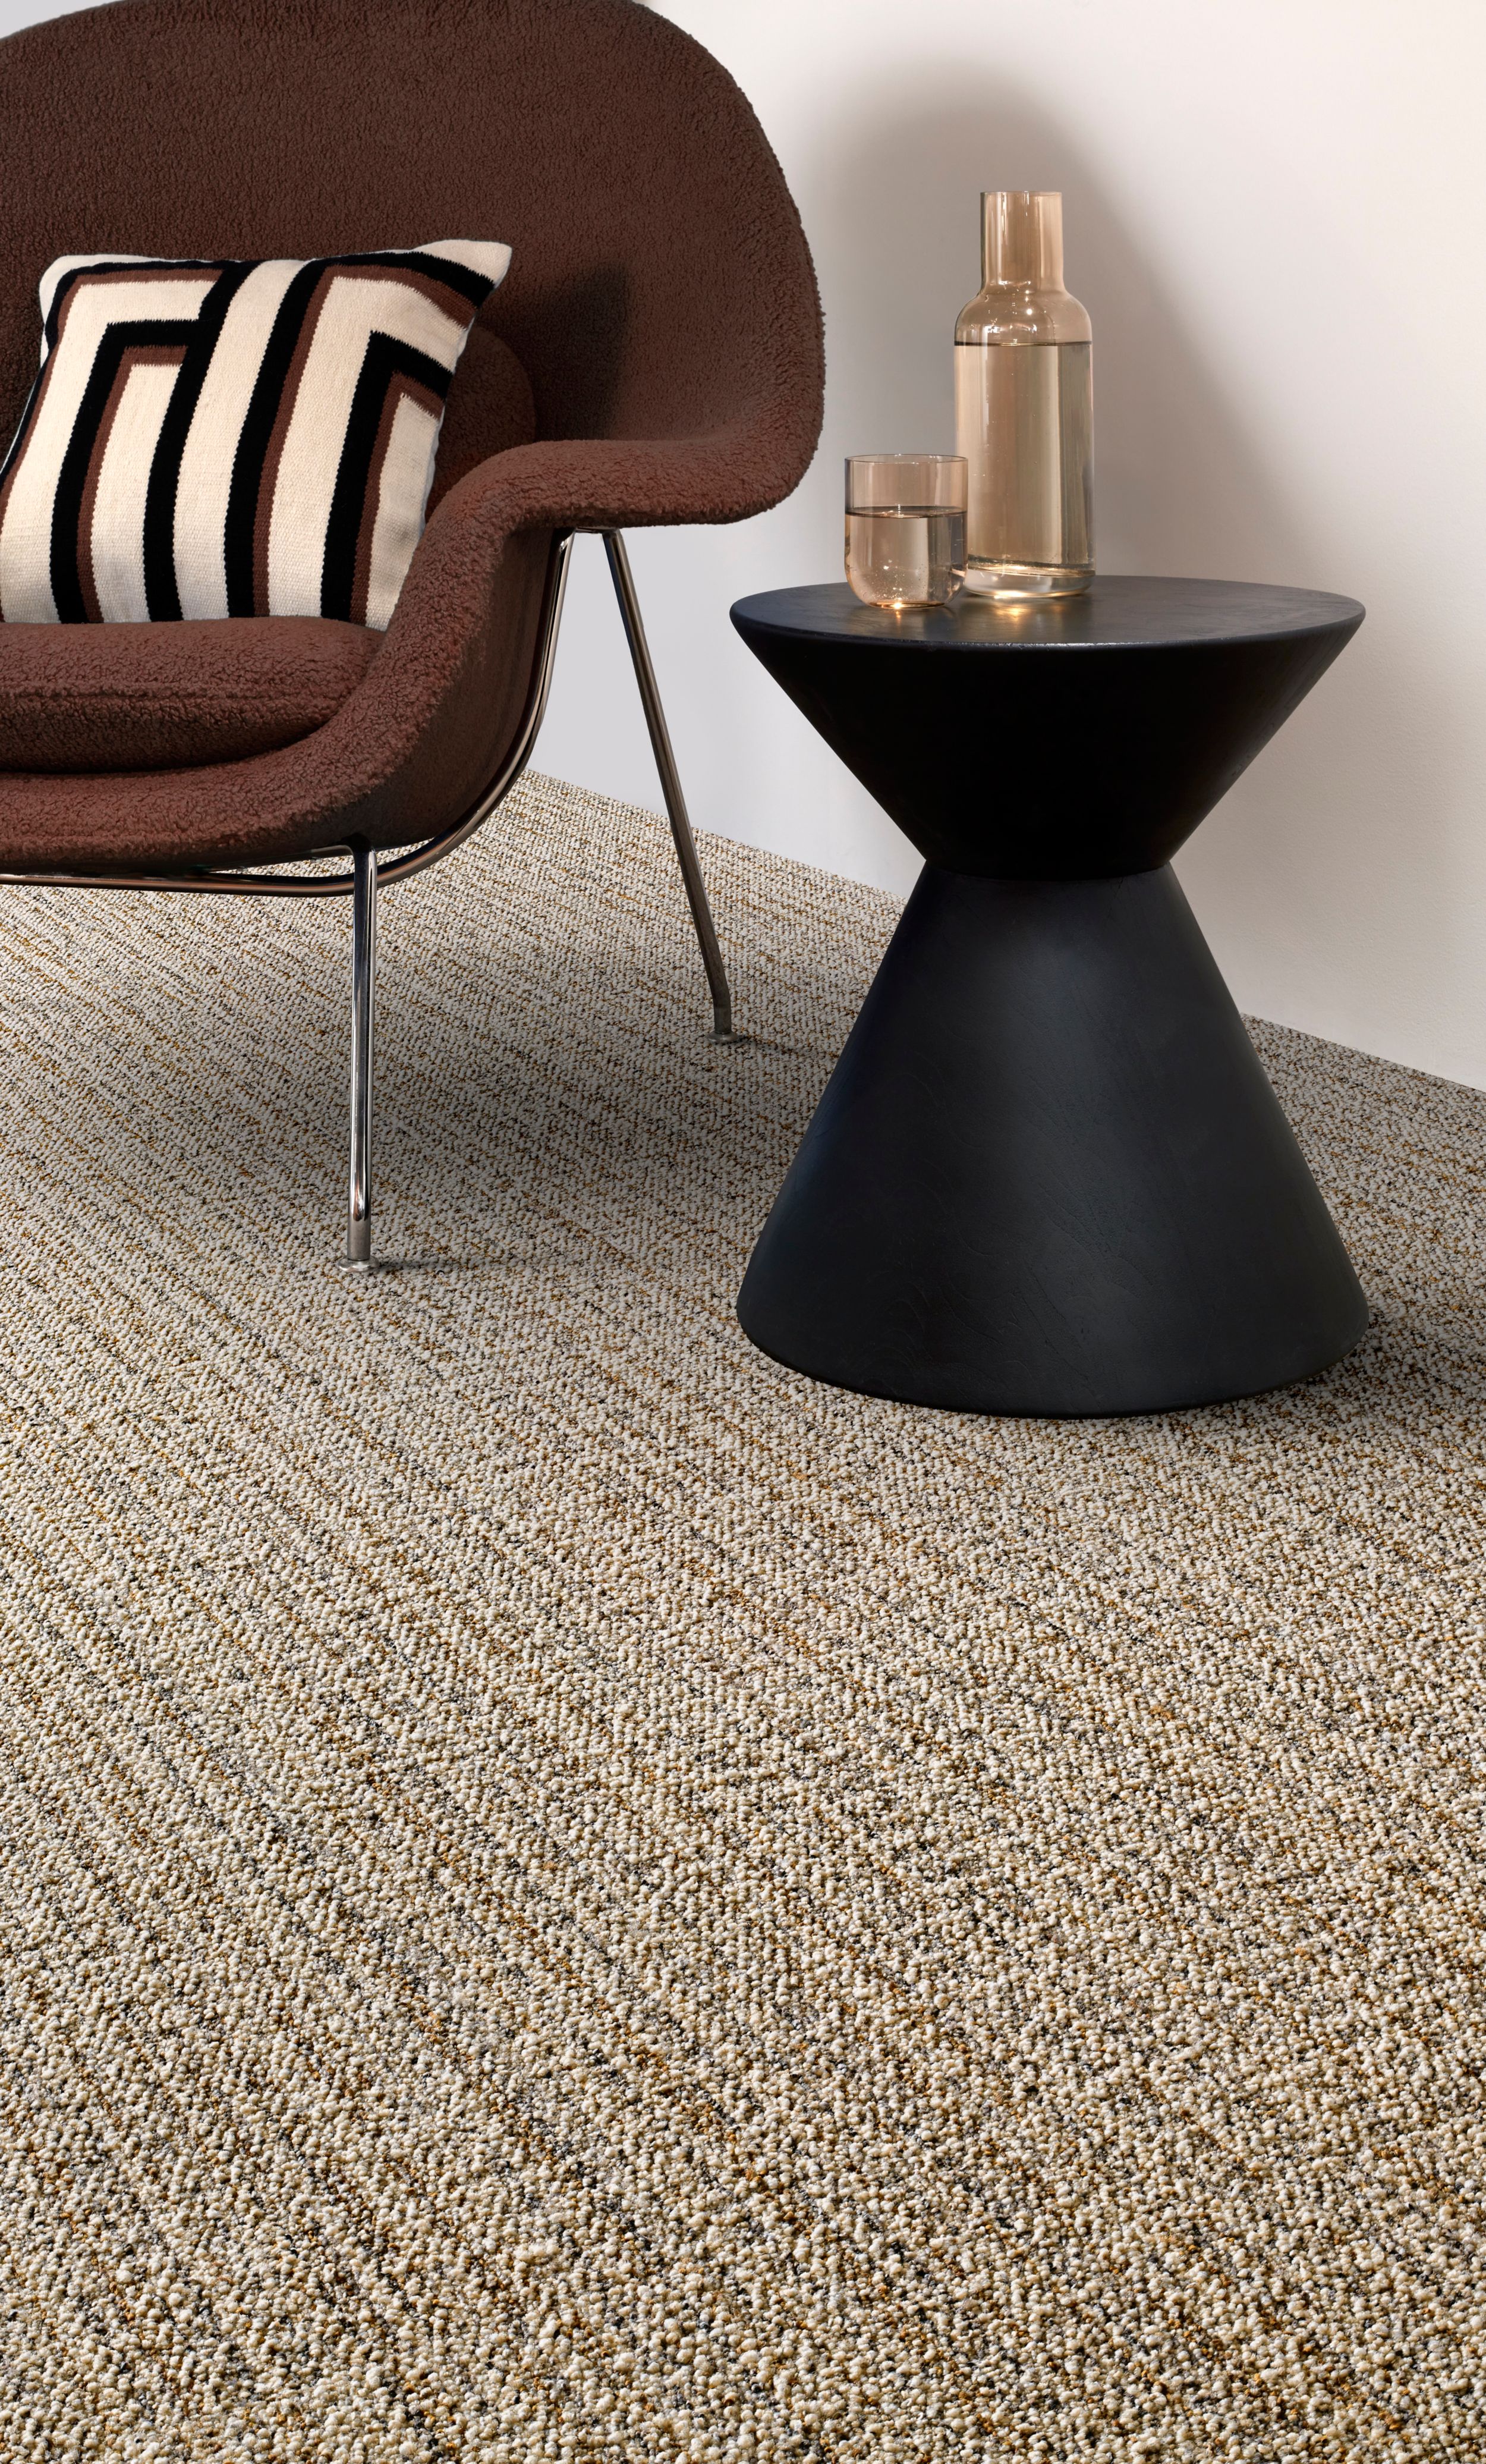 Interface E616 plank carpet tile in corporate lobby or private office imagen número 2